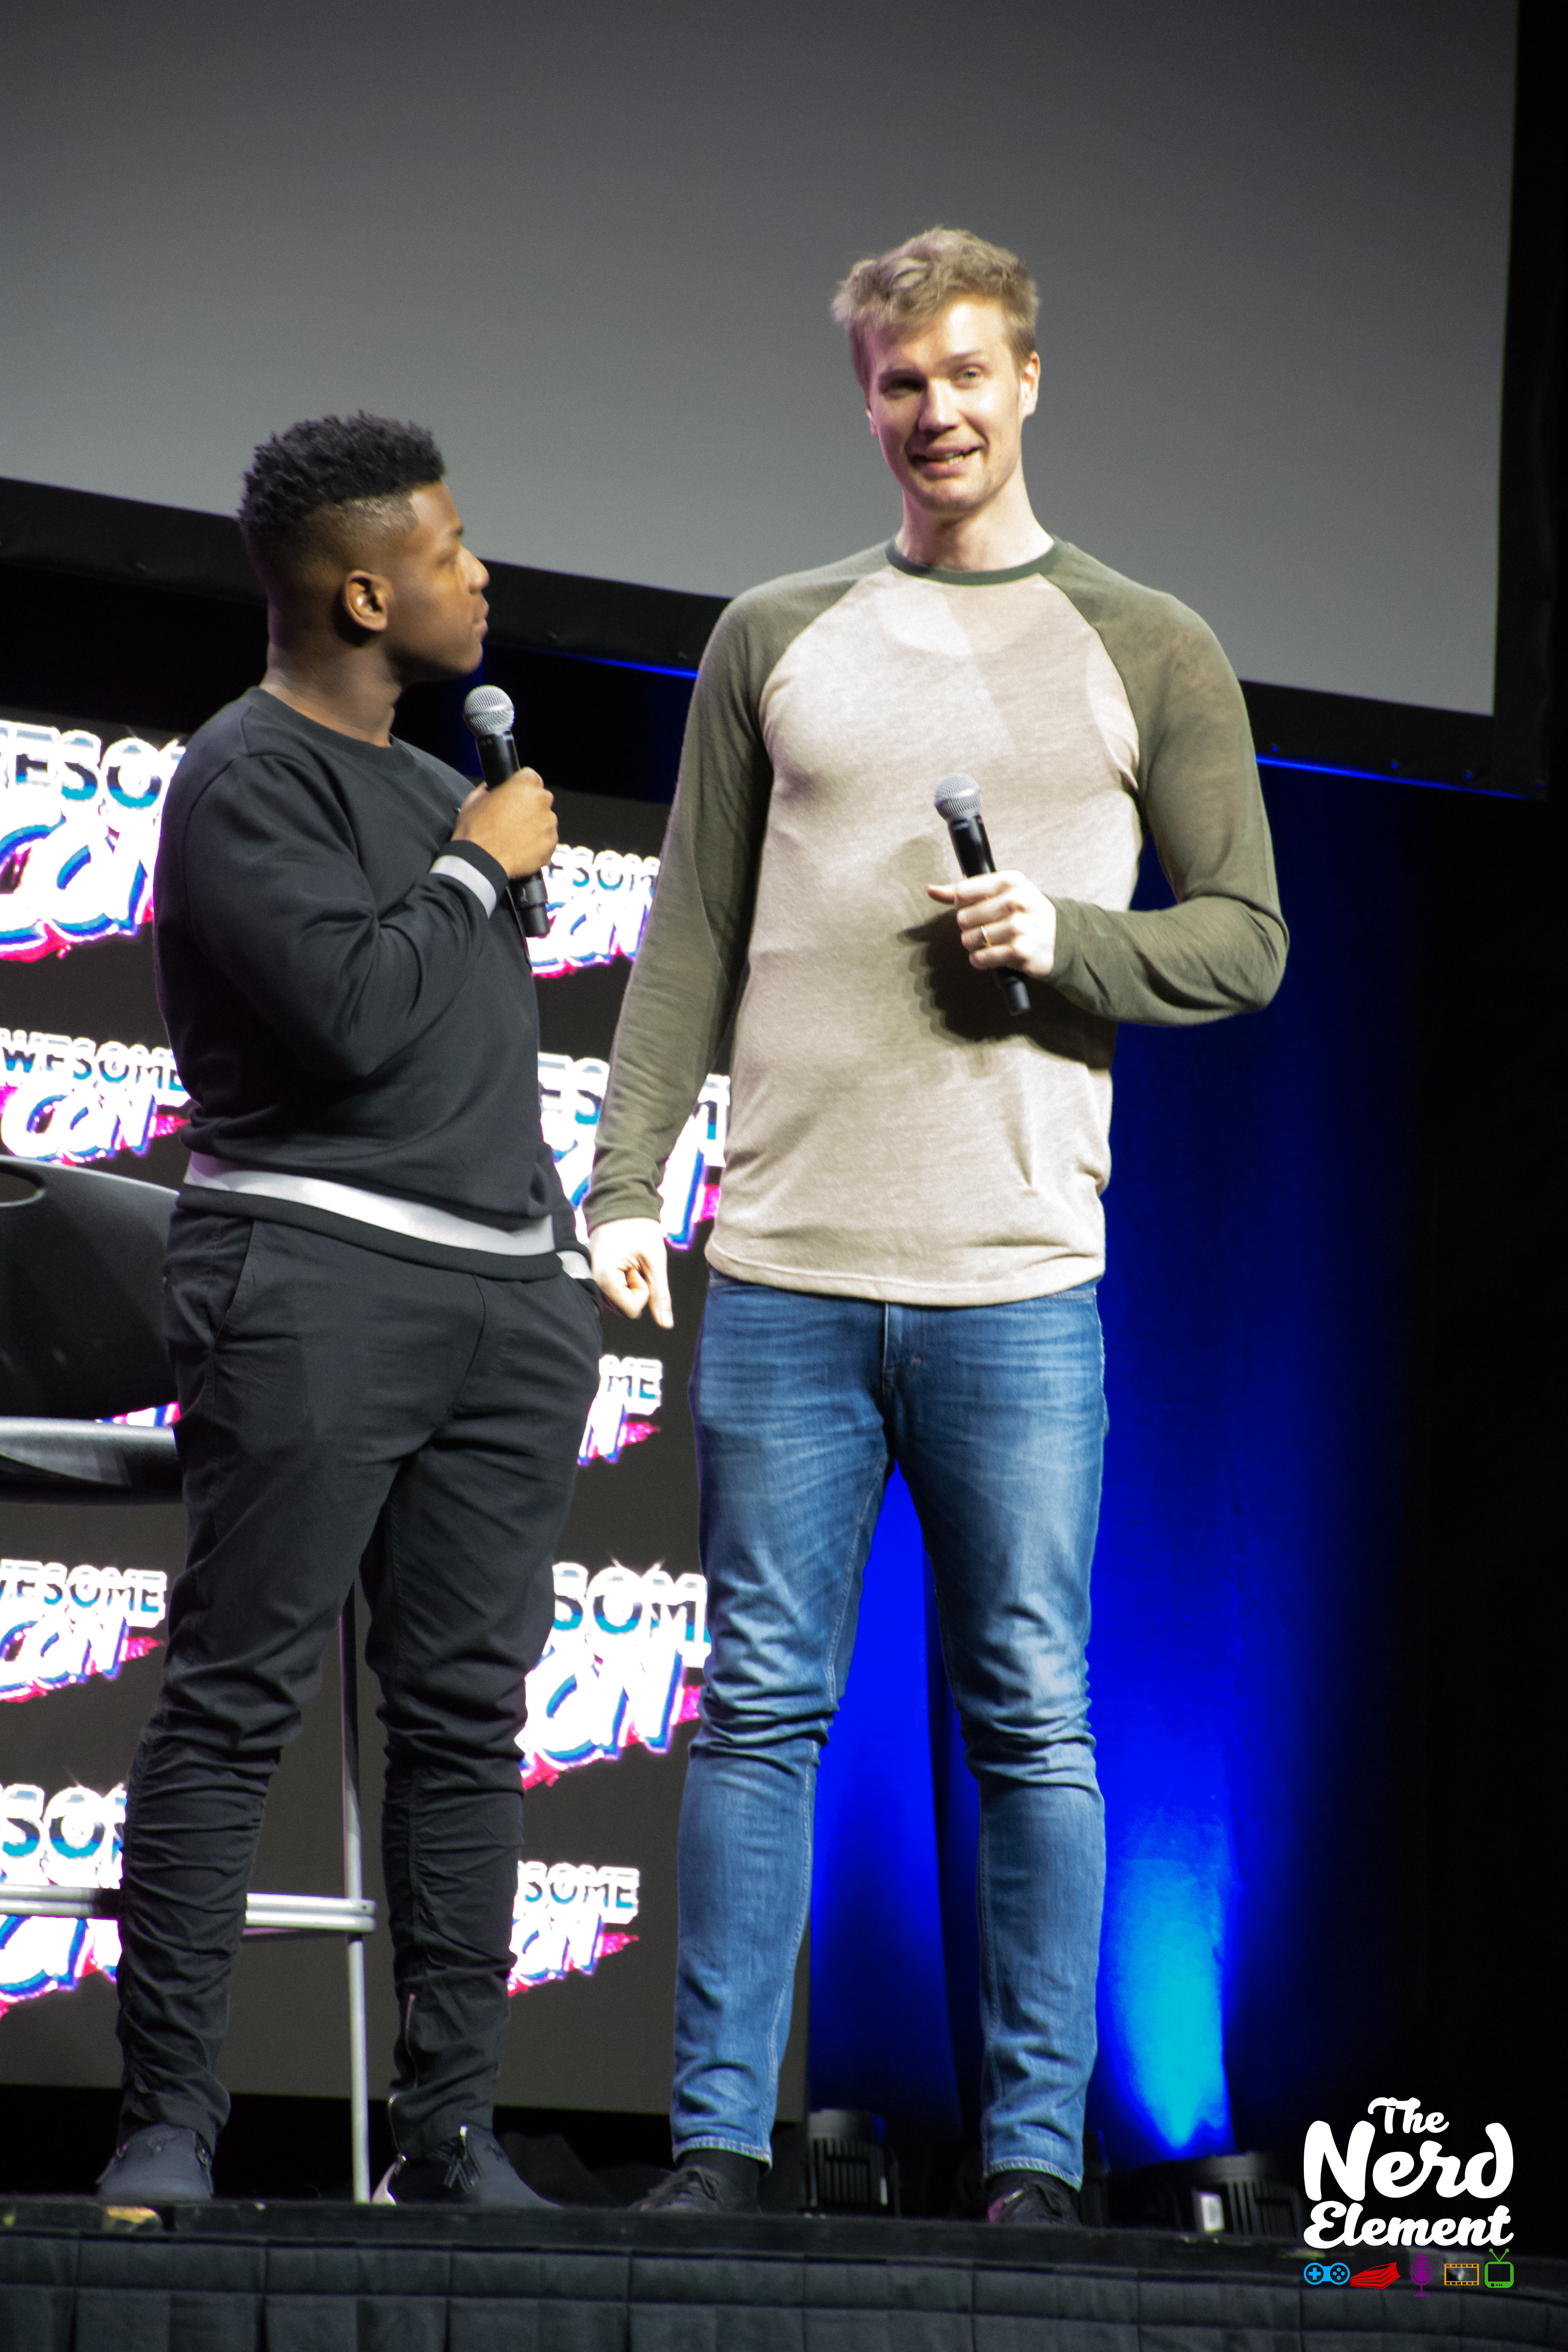 Chewbacca actor Joonas Suotamo surprised attendees at the panel